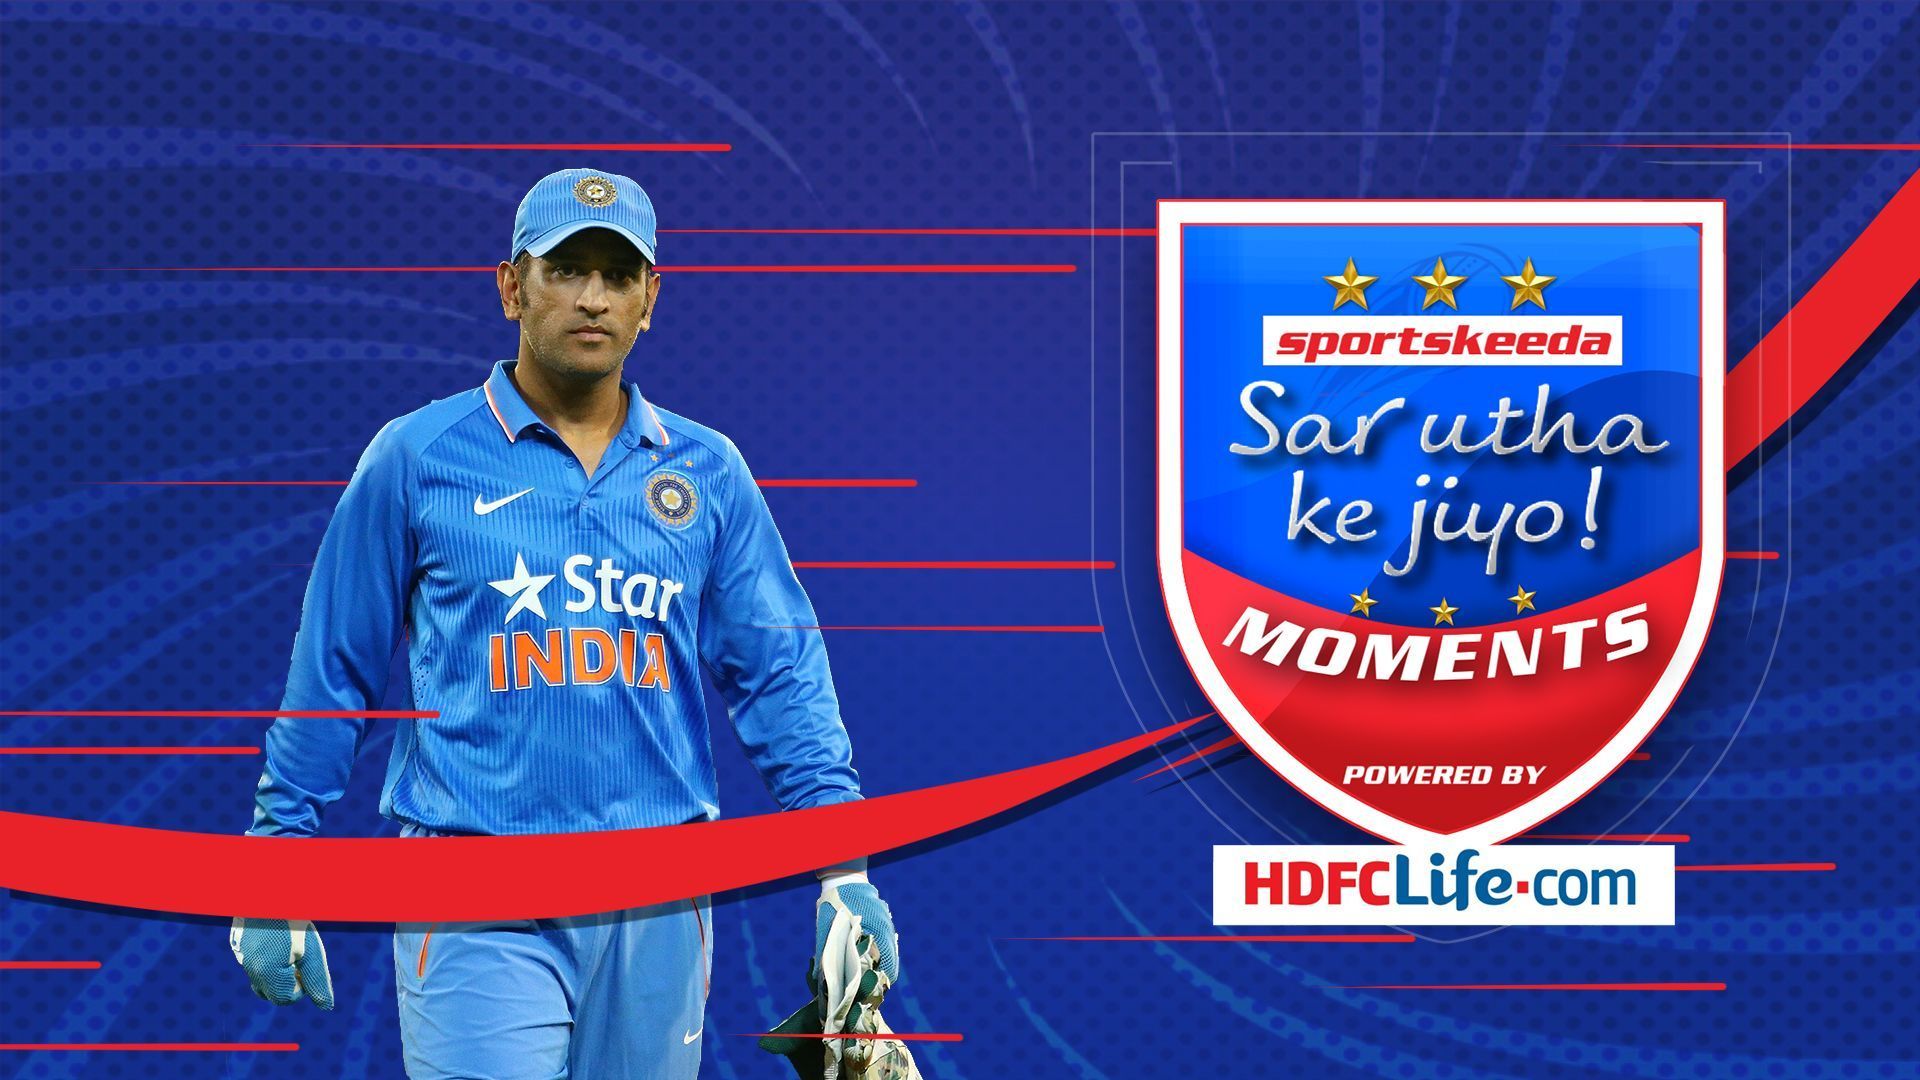 MS Dhoni featured in the 4th episode of HDFC Life